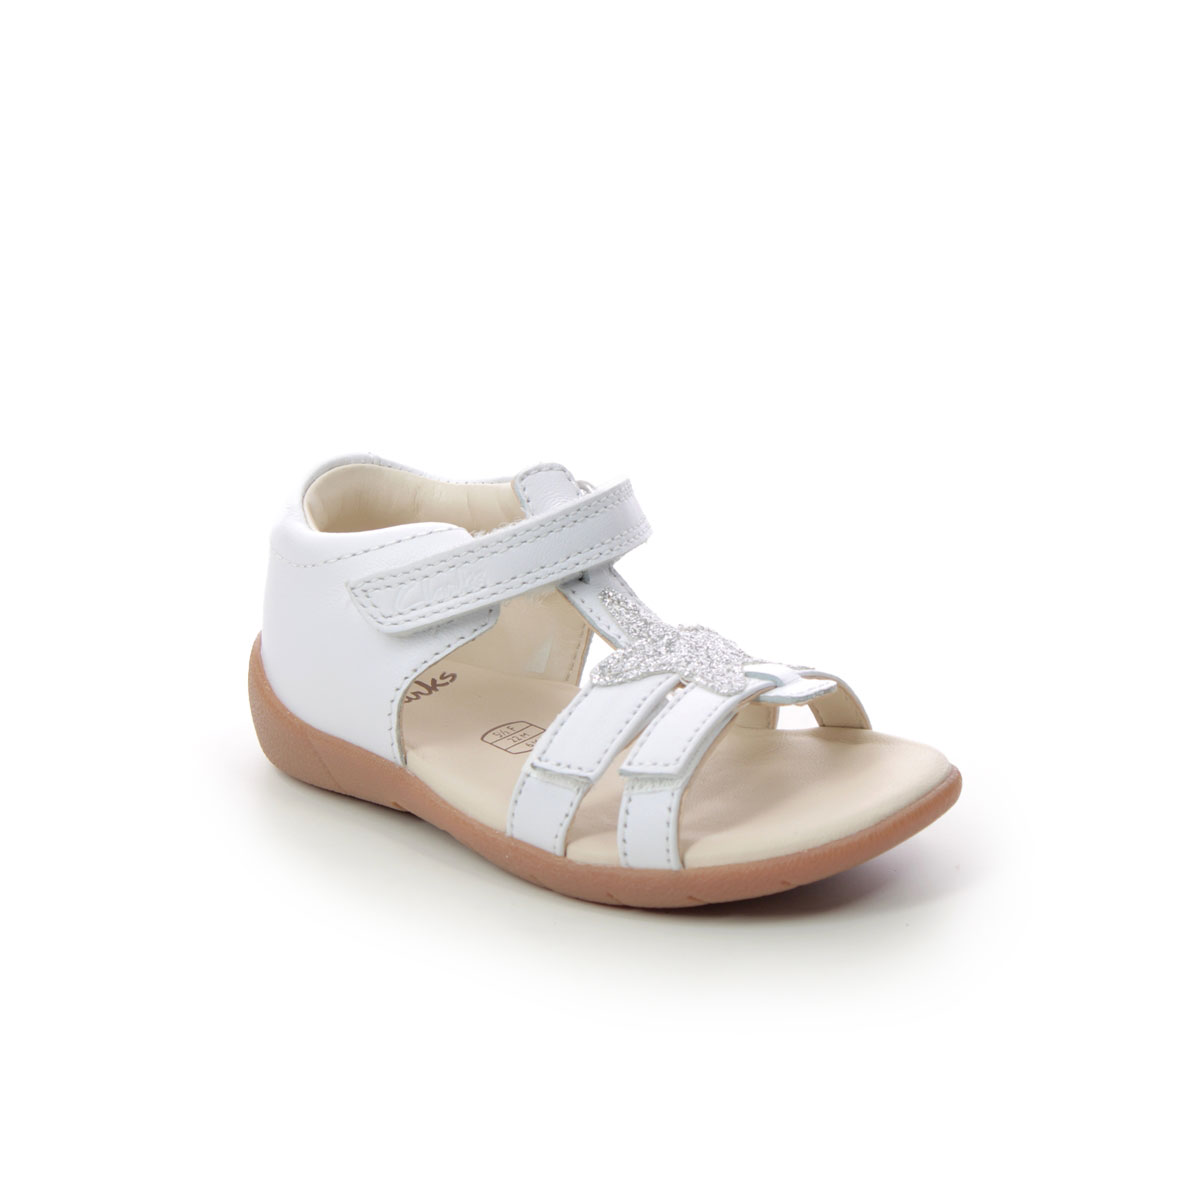 Clarks Zora Summer T White Leather Kids Sandals 566436F In Size 6.5 In Plain White Leather F Width Fitting Regular Fit For kids